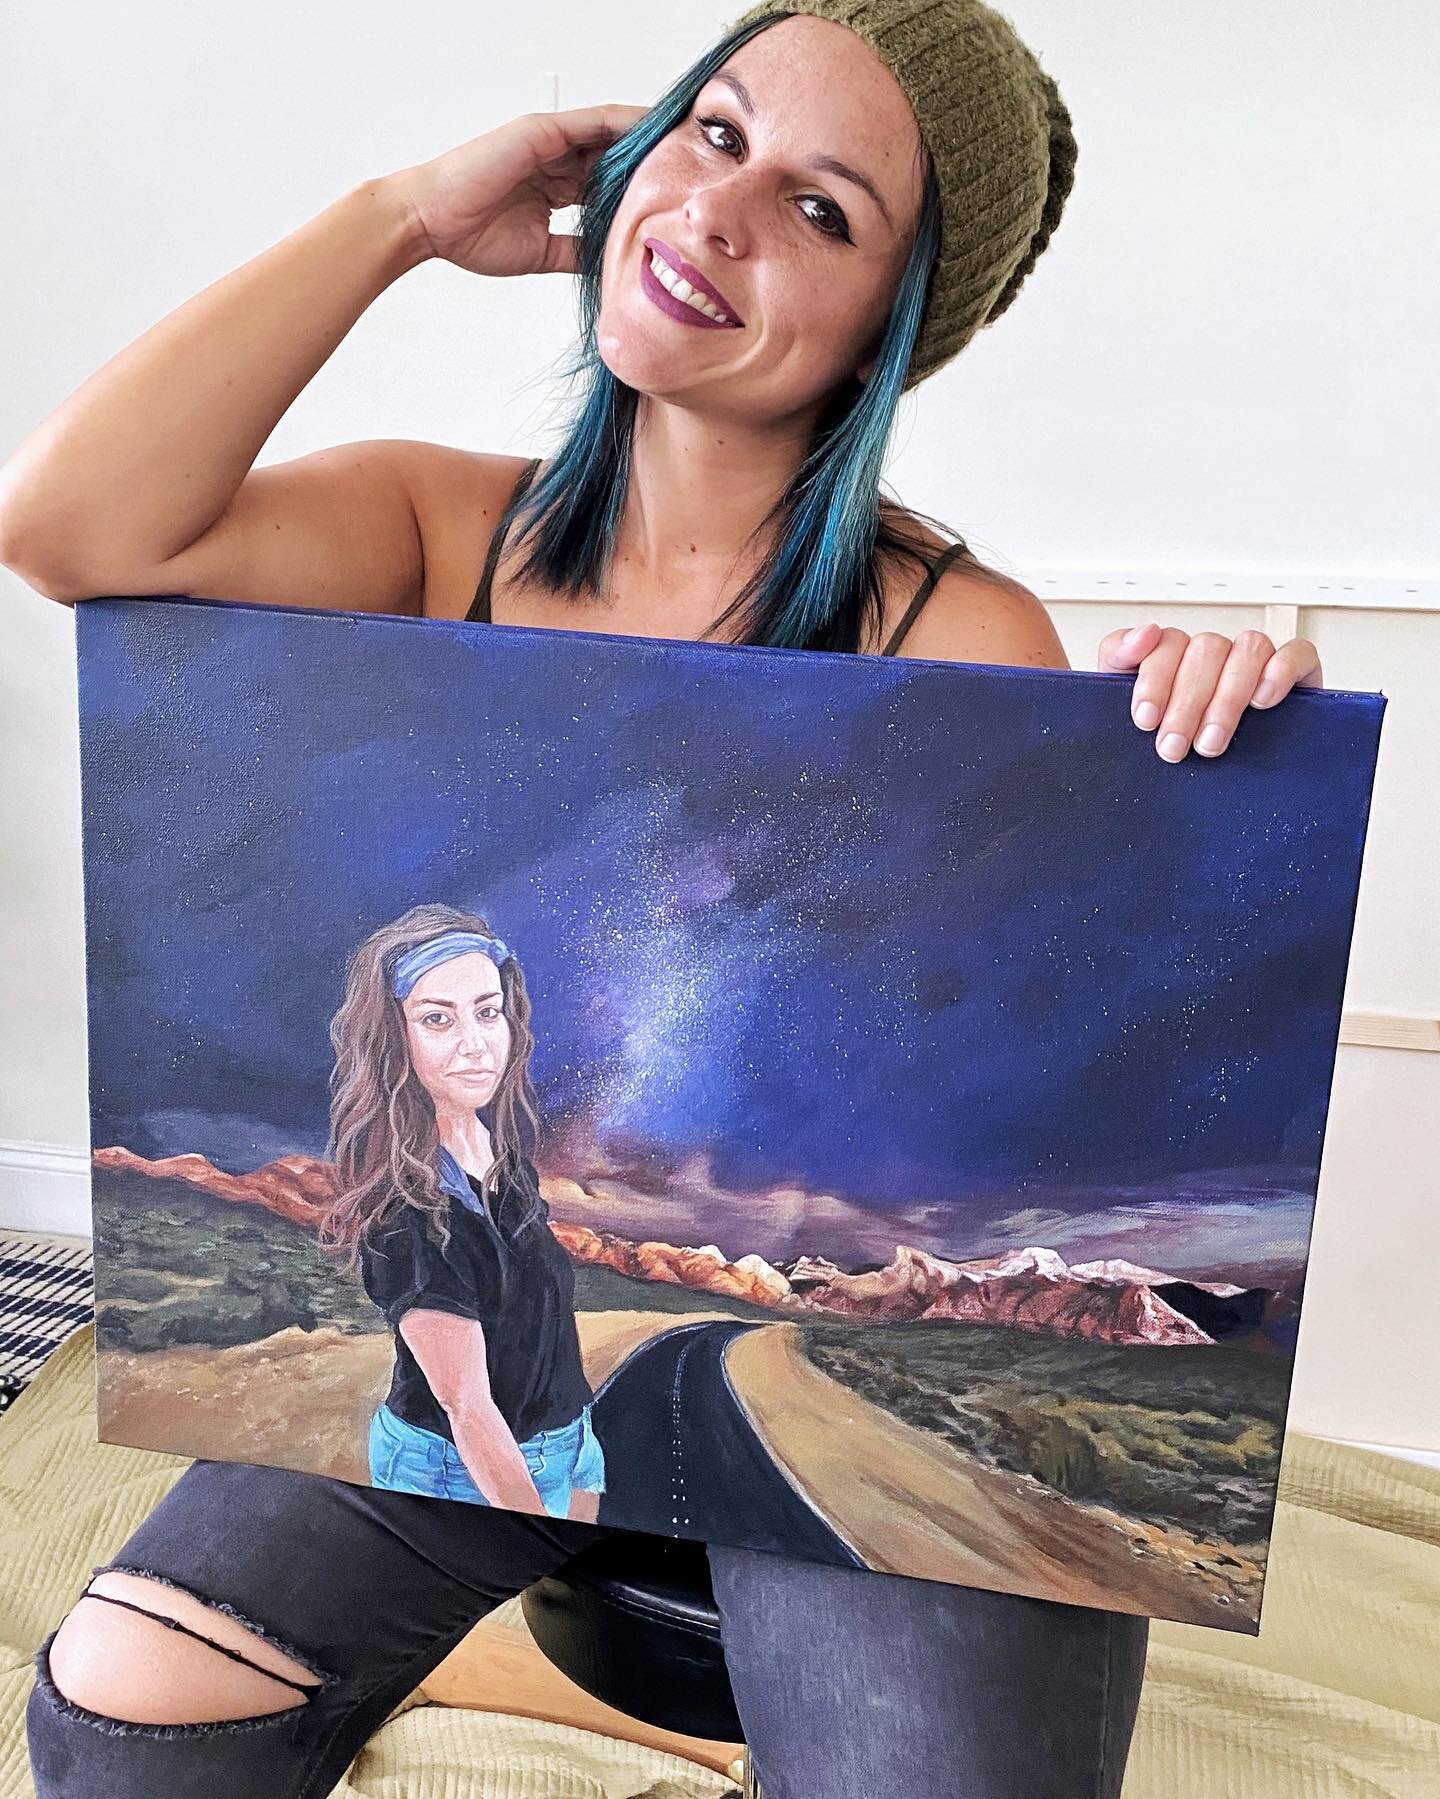 I want to celebrate anyone who&rsquo;s had the courage to stand at a crossroads and make a decision.⁣
⁣
I started this painting February of last year, the same month I began my new career journey. I had just switched a out a life in teaching to join 